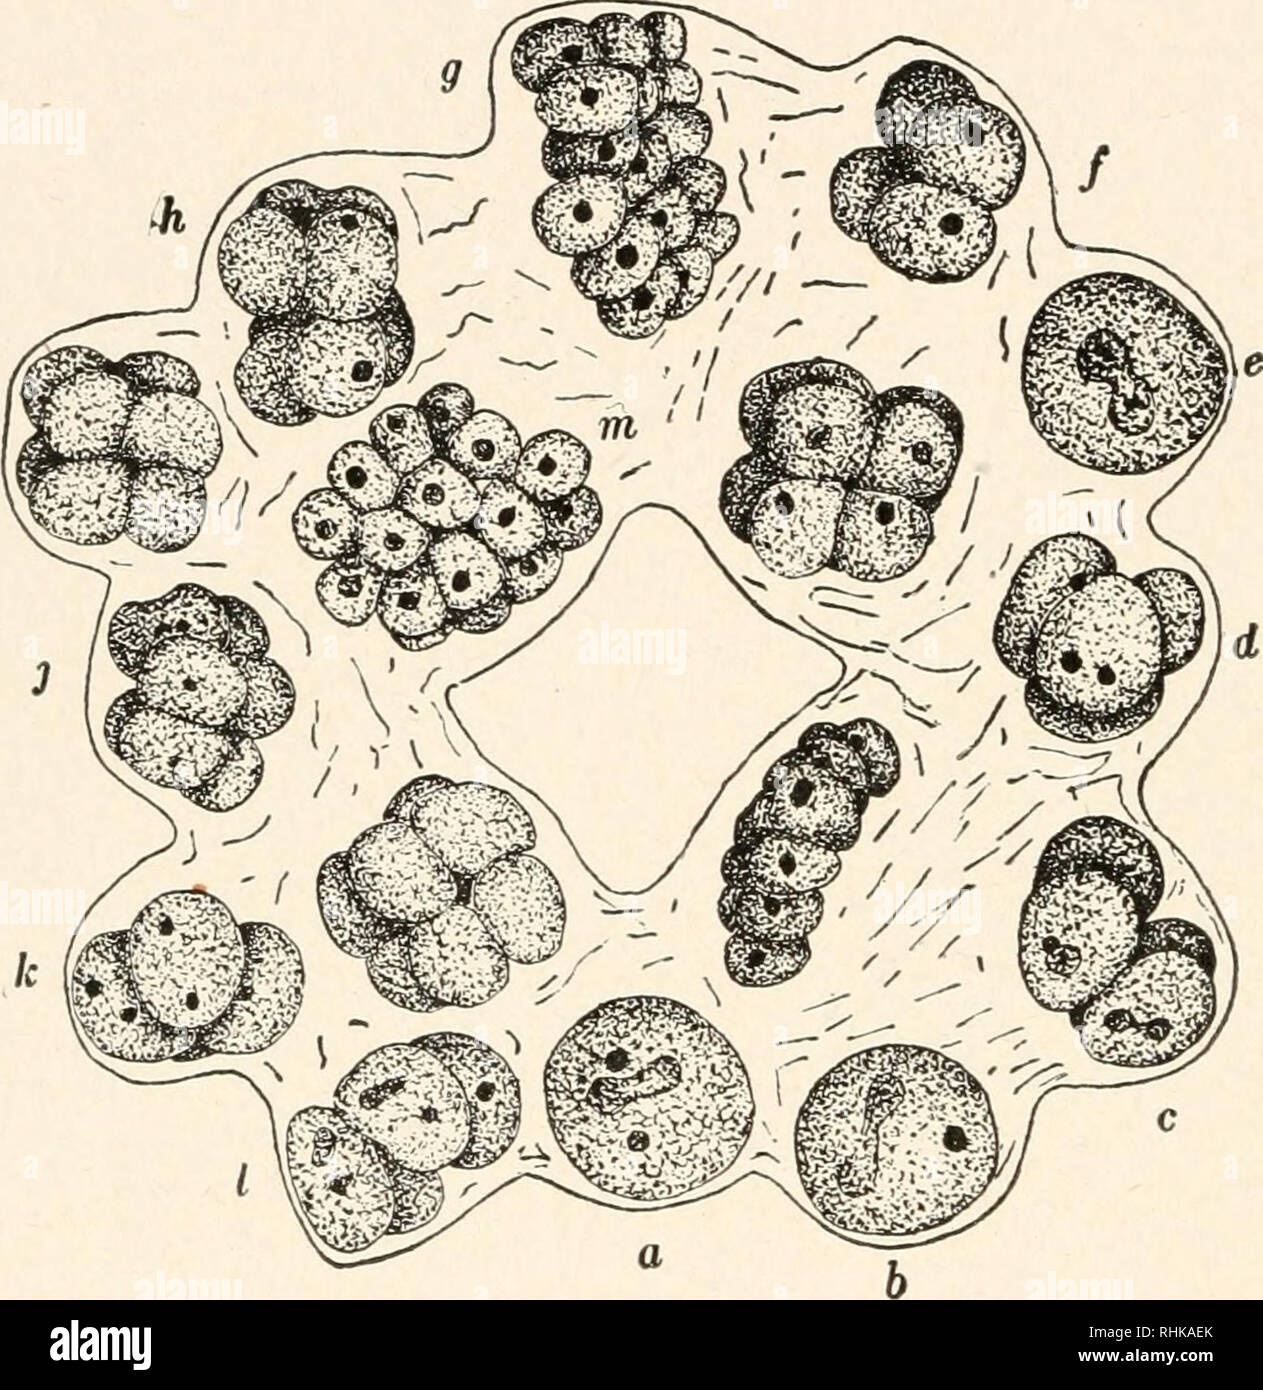 . Biology. Biology. 78 ORGANISMS OF TISSUES tive or somatic cells, and reproducing or reproductive cells. The differentiation is carried a step farther in the case of Pleo- dorina where twenty-eight of the cells are capable of reproduc- ing, while the remaining four cells, making up the thirty-two cell colony, are purely vegetative and do not reproduce. Here there is a permanent differentiation in the colony and a long step toward the metazoan condition. In some colonies finally, as in Gonium pectorale, the method of development approaches. k FIG. 32.—Reproduction of Gonium pcctorale. Each of  Stock Photo